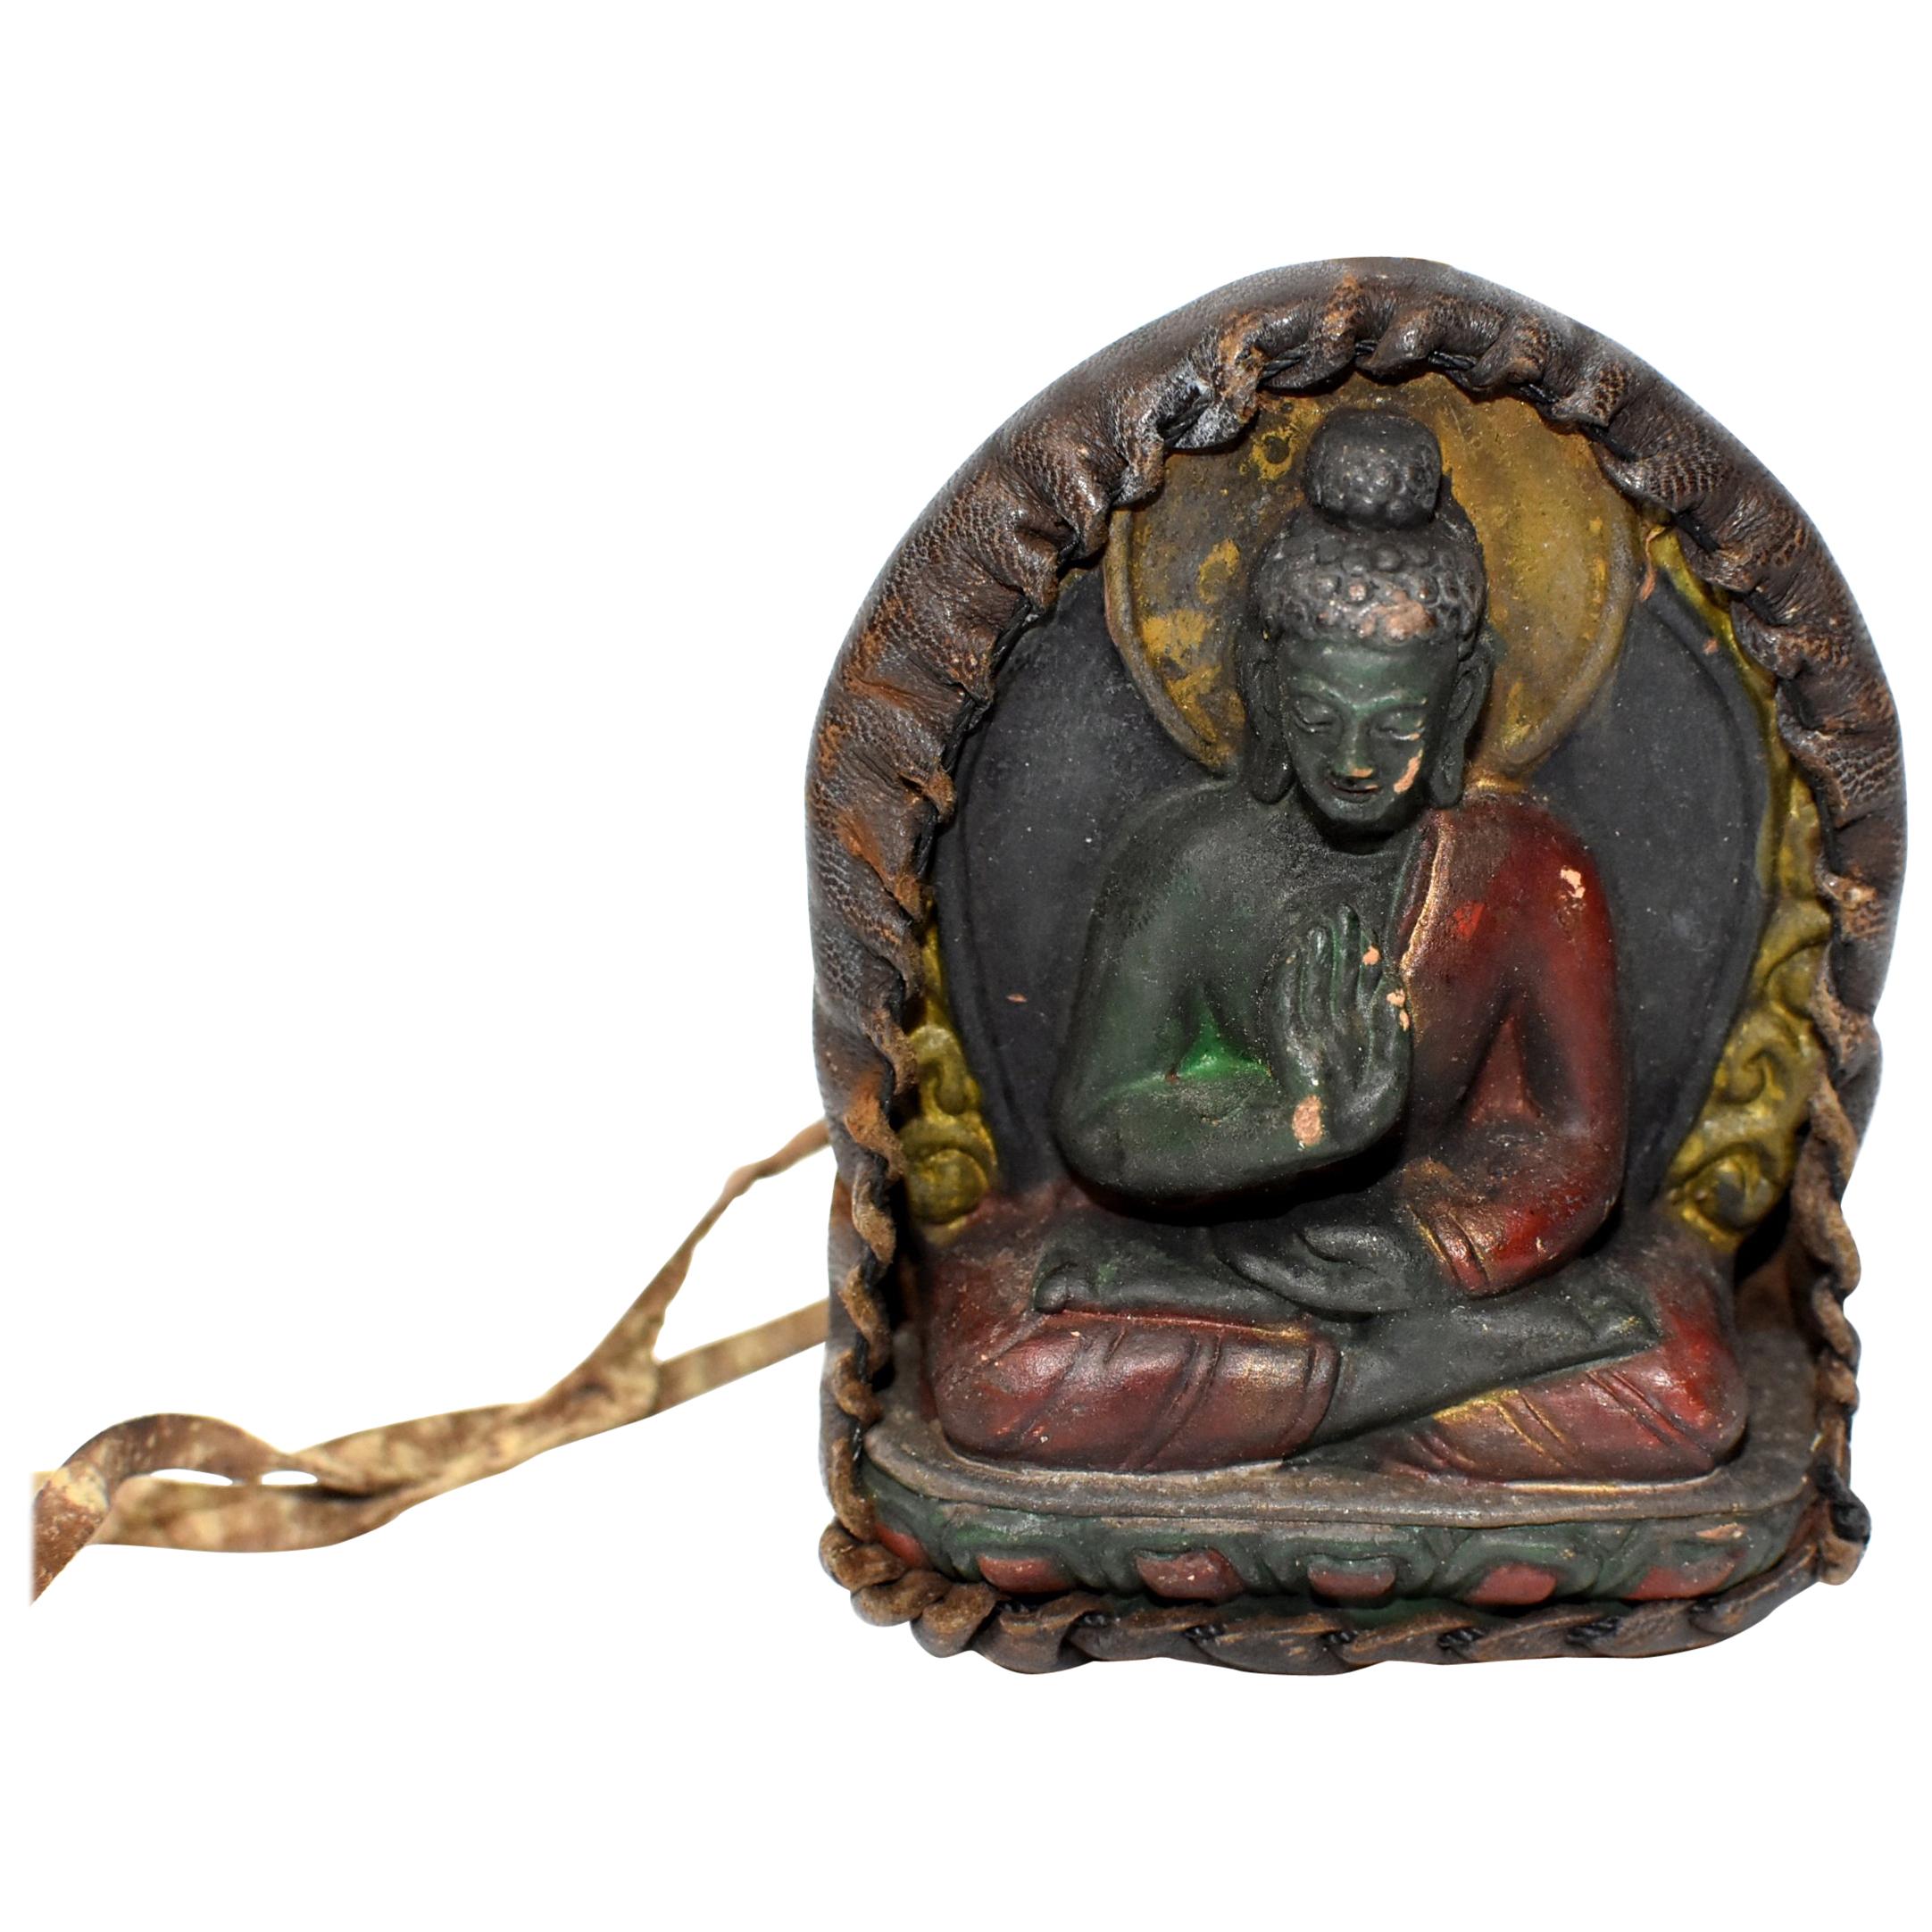 A Tibetan amulet featuring Buddha encased in a handmade leather shrine. Buddha is made of terracotta, beautifully crafted displaying well defined facial features, decorated robe and a wonderful smile. Featured is Buddha in abhaya mudra, a protection